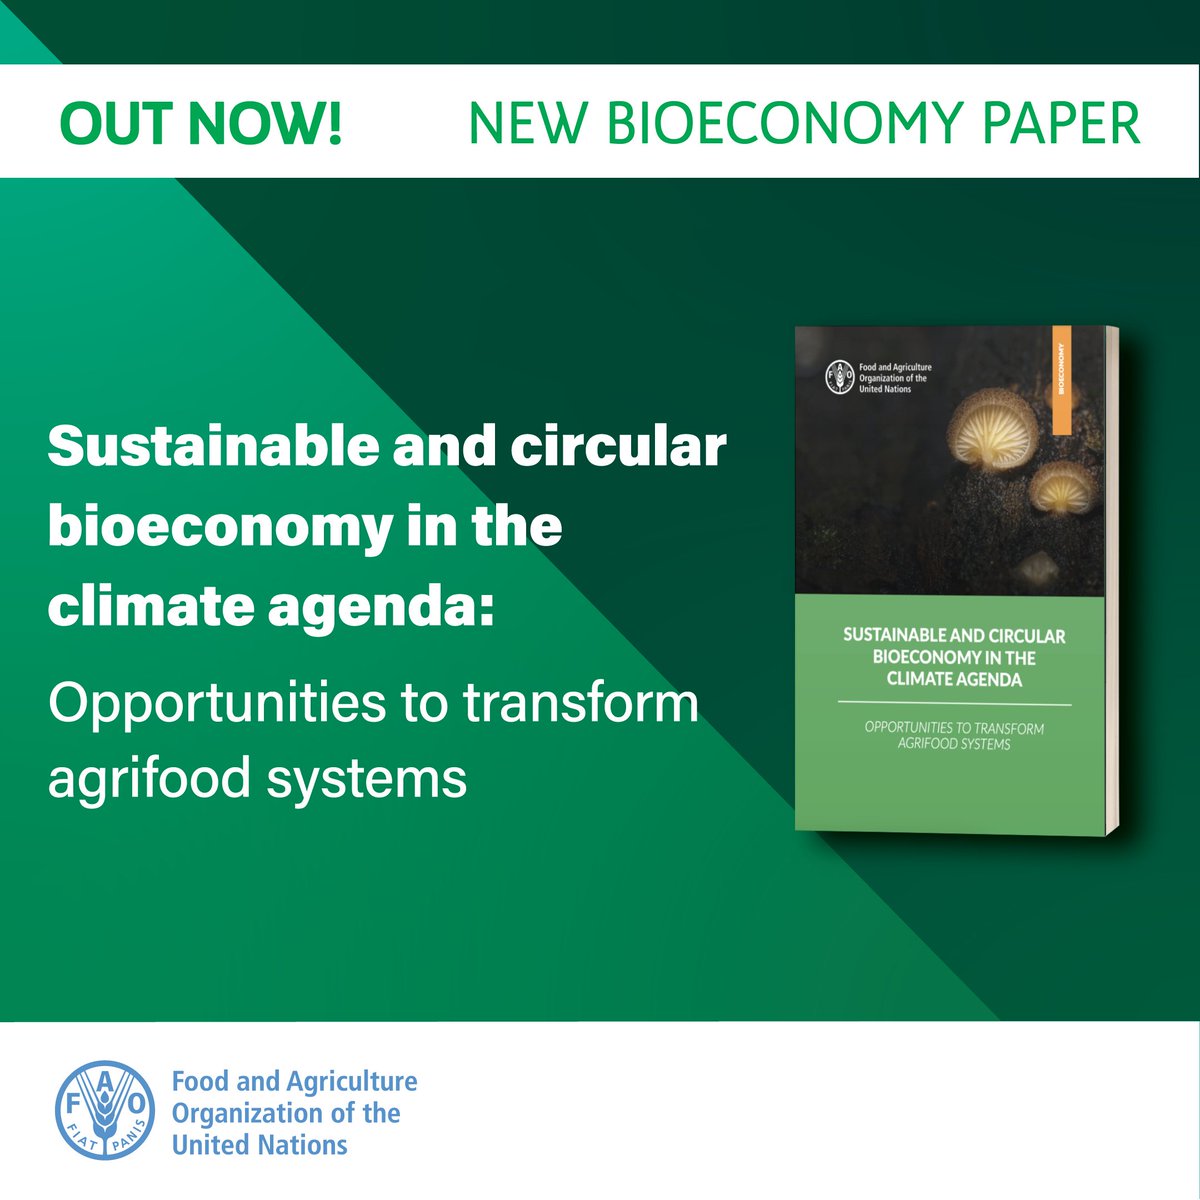 During #COP27, FAO was at the heart of #bioeconomy discussions. We also launched a new publication 📖 on #sustainable and circular bioeconomy in the climate agenda. Check out our recap here 👉 bityl.co/FnDV